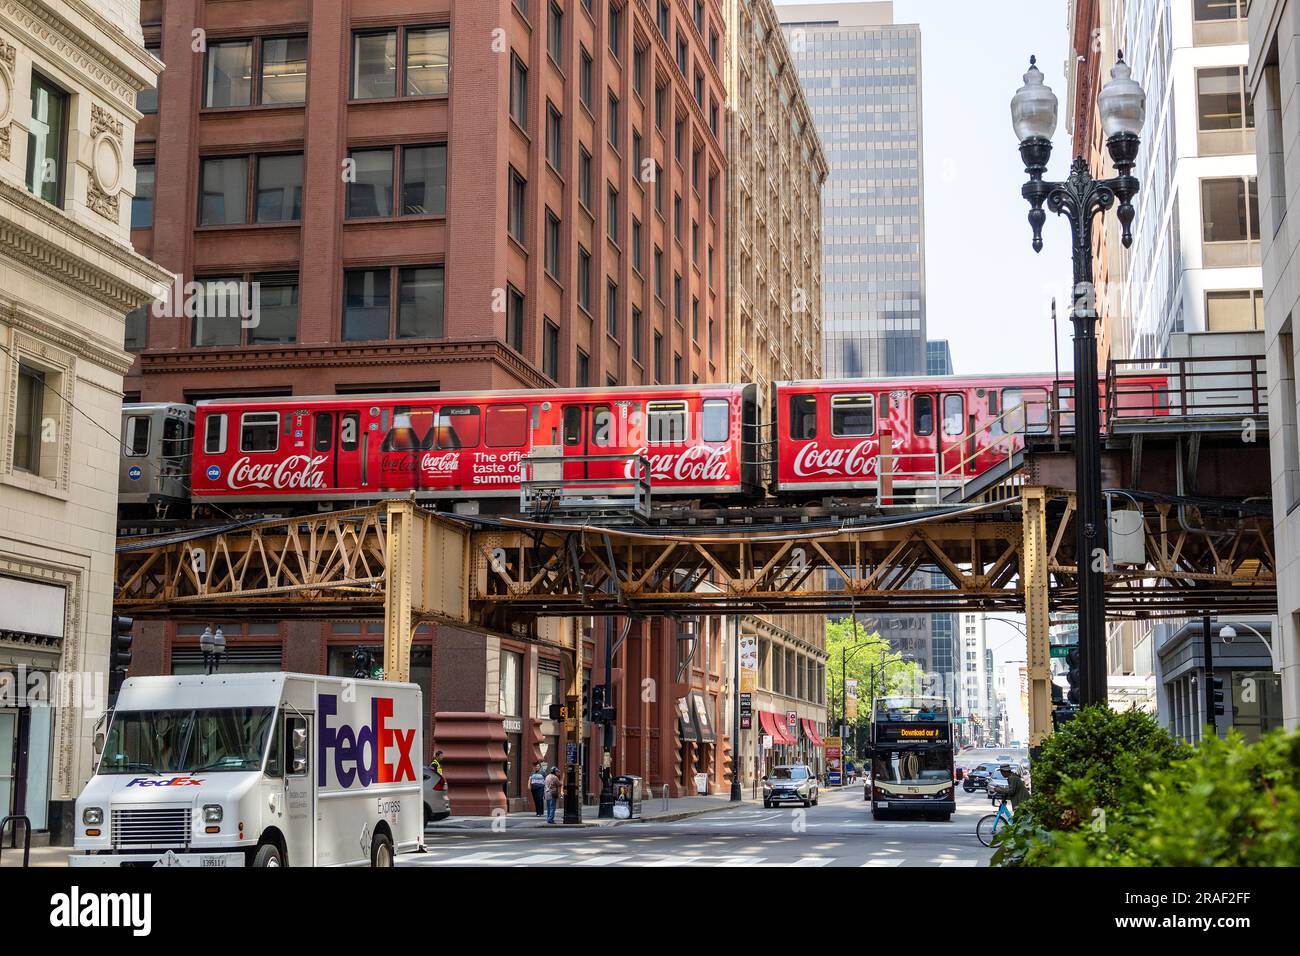 Chicago 'L' Elevated Blue Line Train Passing Over A Chicago Street, Rail Cars Are Wrapped In Coca Cola Advertising, Chicago Transit Authority Stock Photo